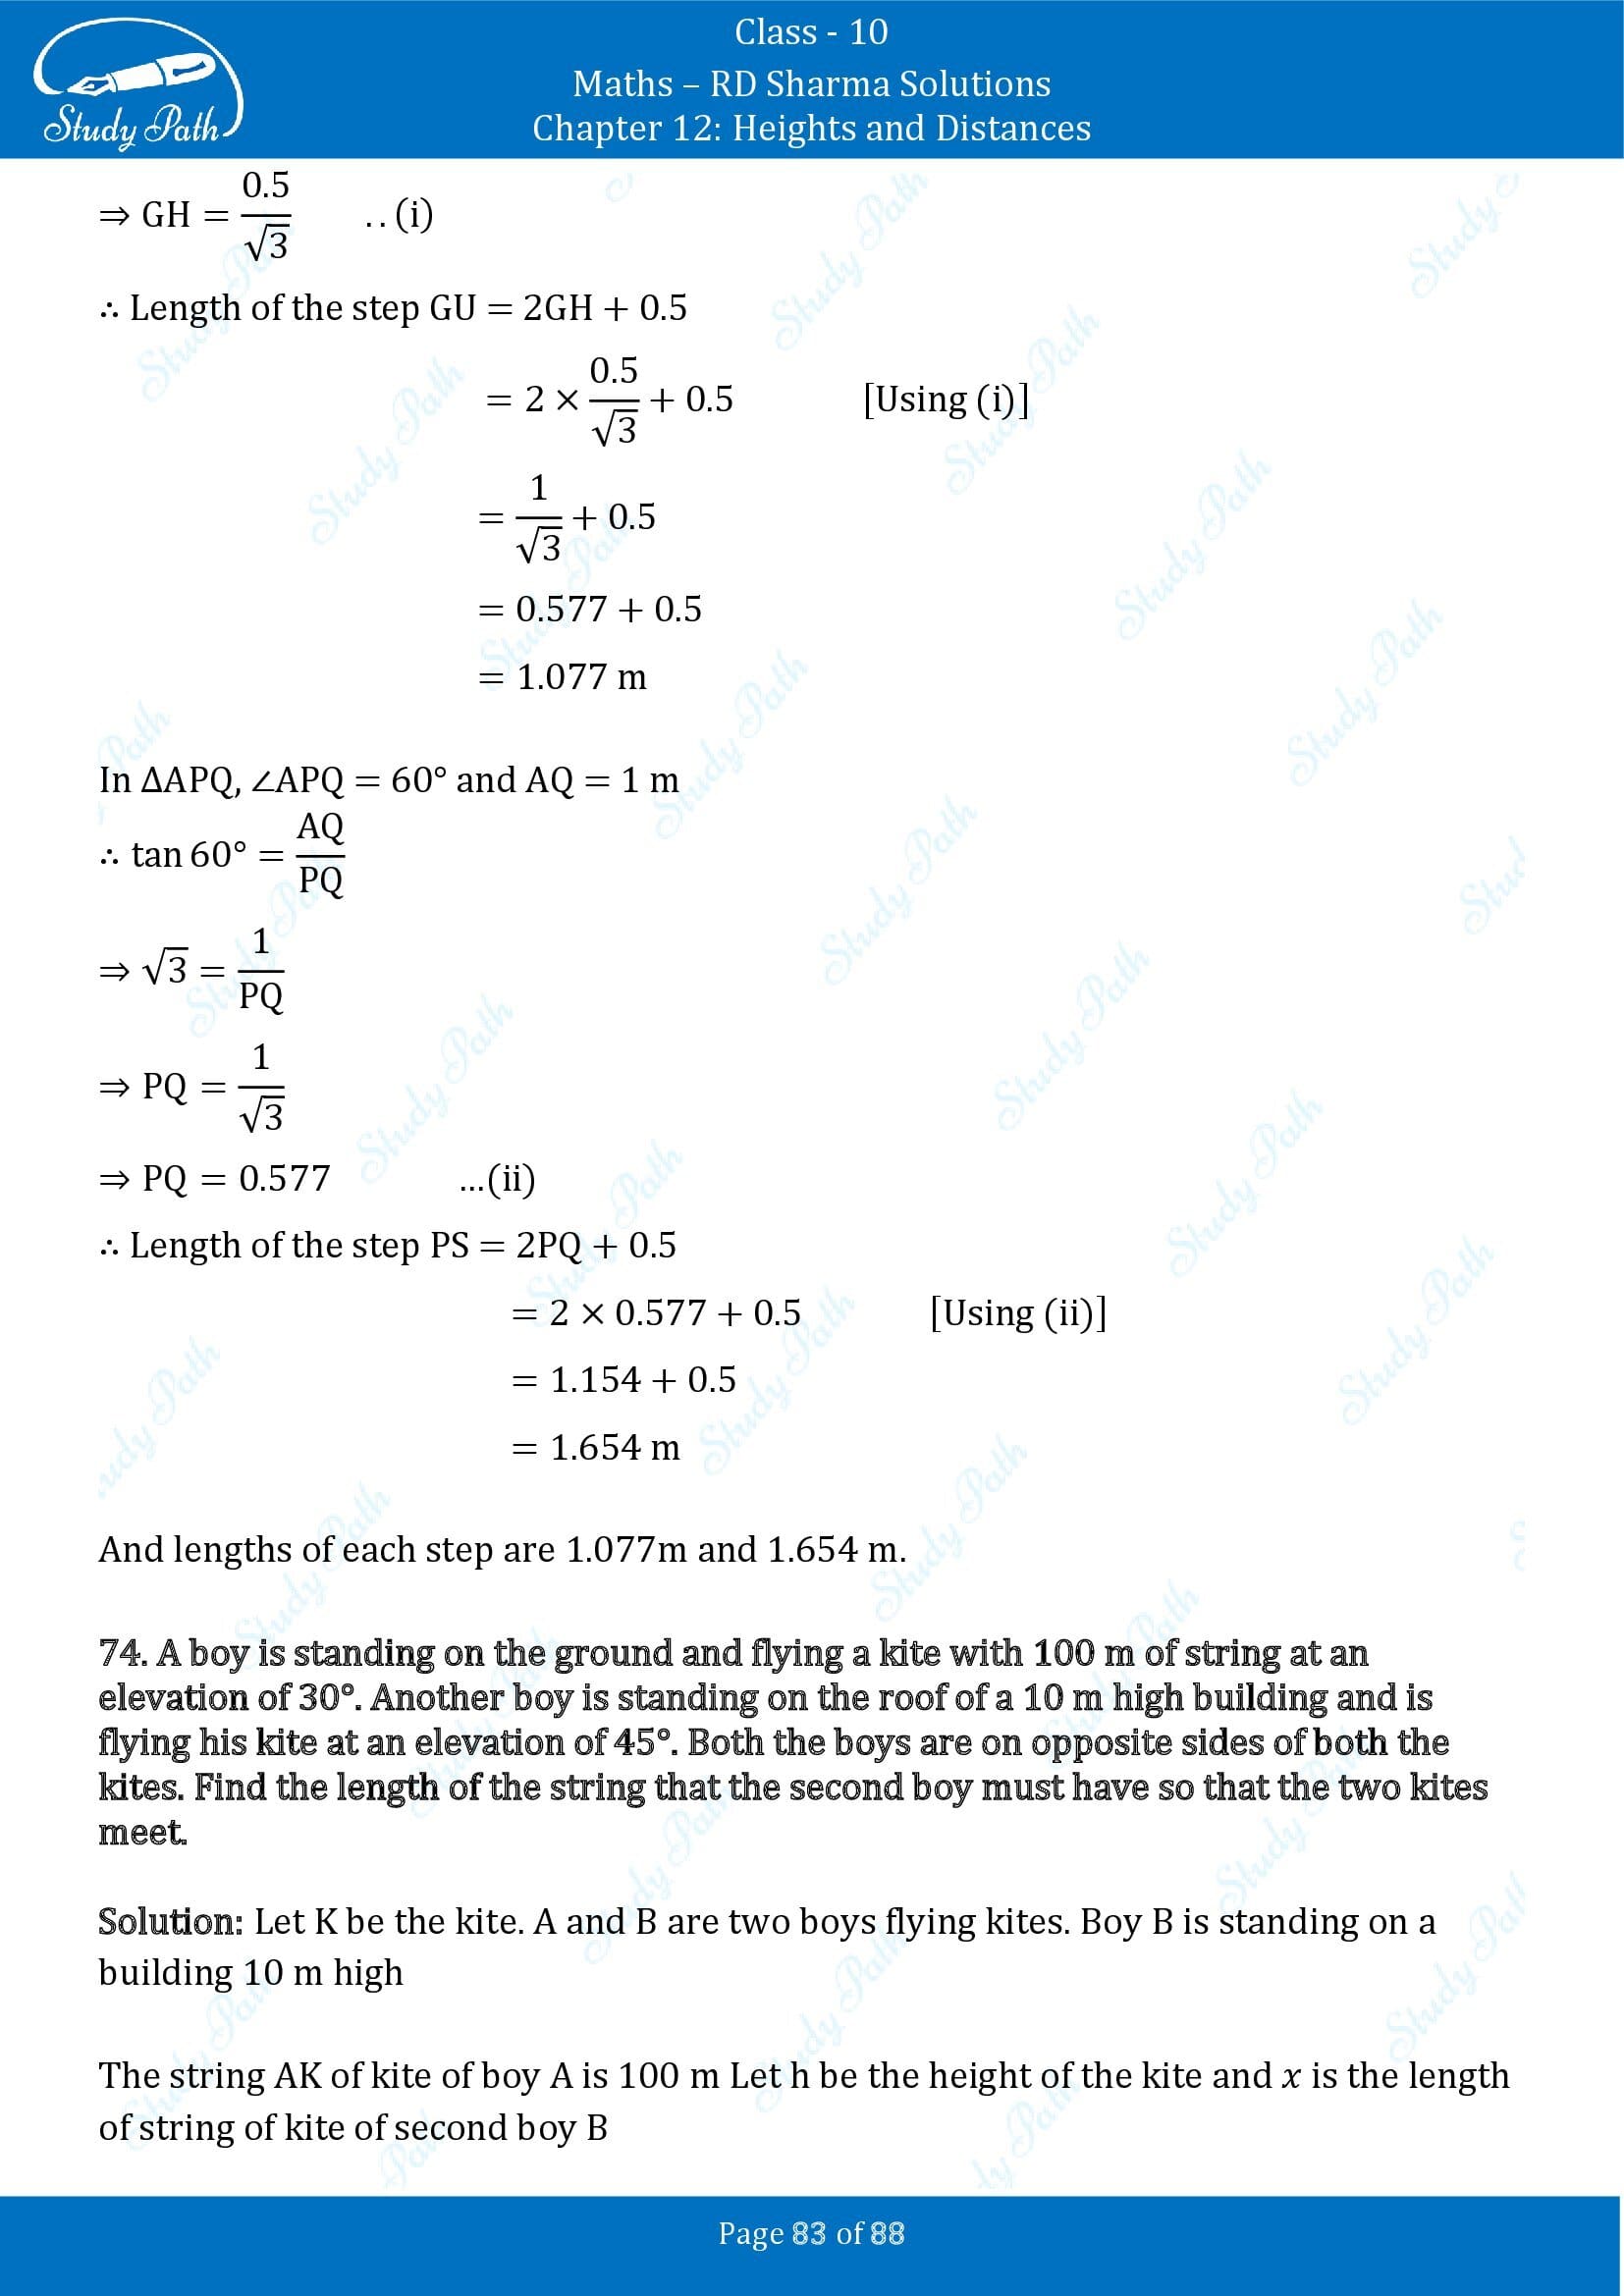 RD Sharma Solutions Class 10 Chapter 12 Heights and Distances Exercise 12.1 00083